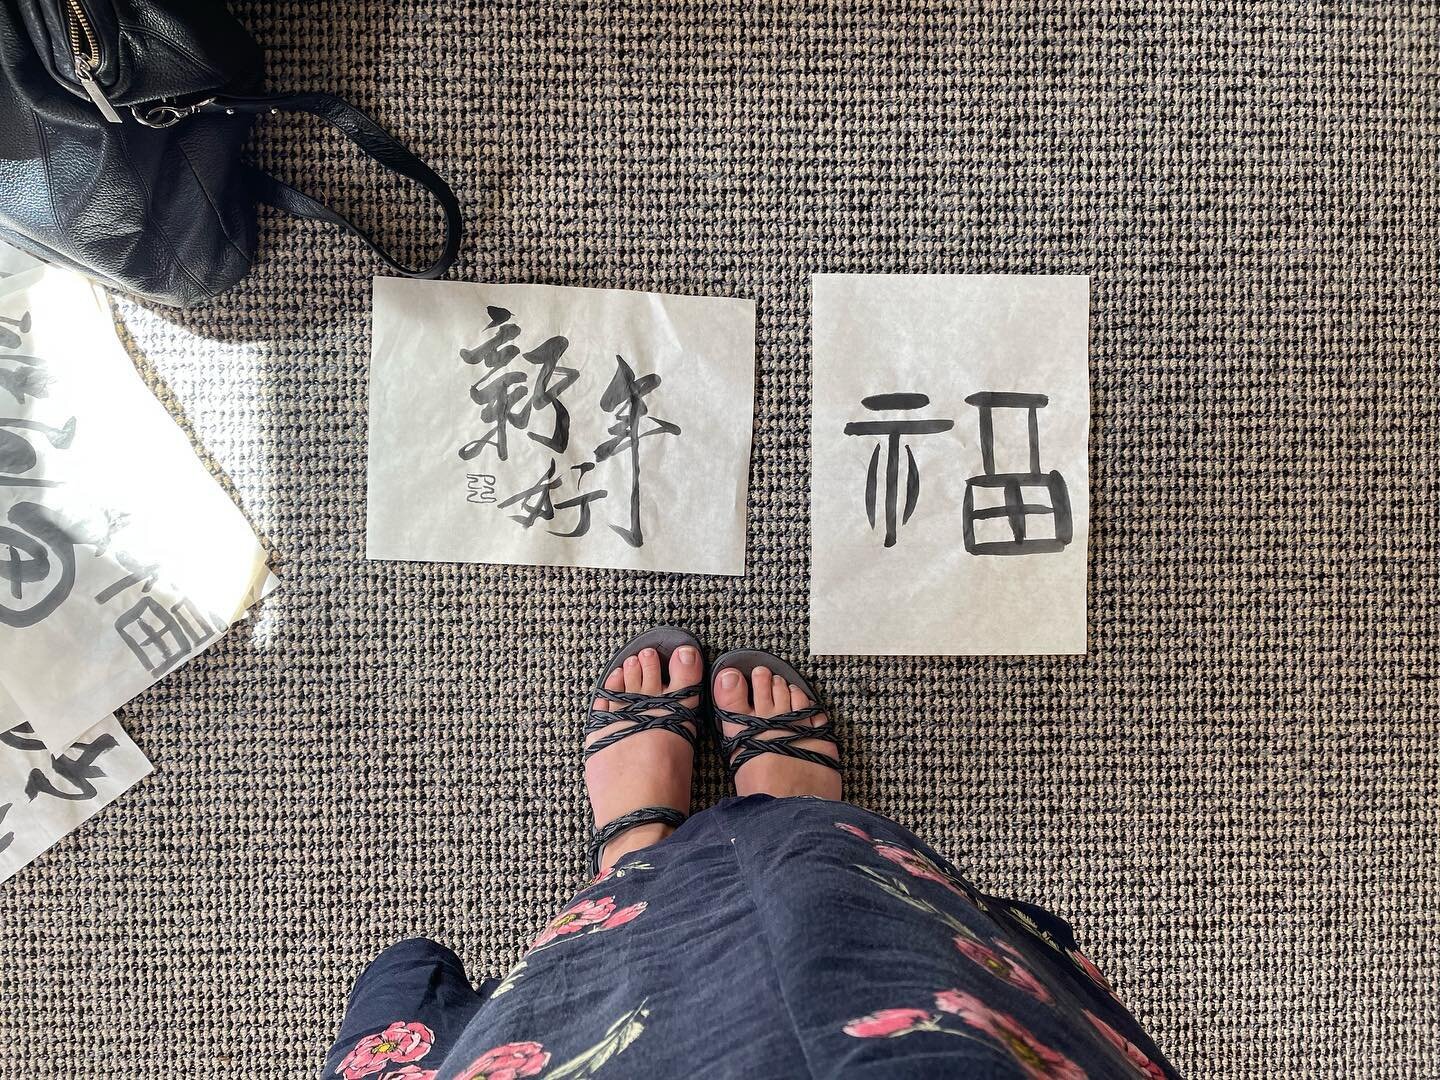 Week one learning calligraphy from Xin. We are learning this for 2022 Chinese New Year which falls on the 1st of Feb. It will be the year of the Tiger. Today we learnt The blessing 福 Fu, happiness or blessings. ☀️